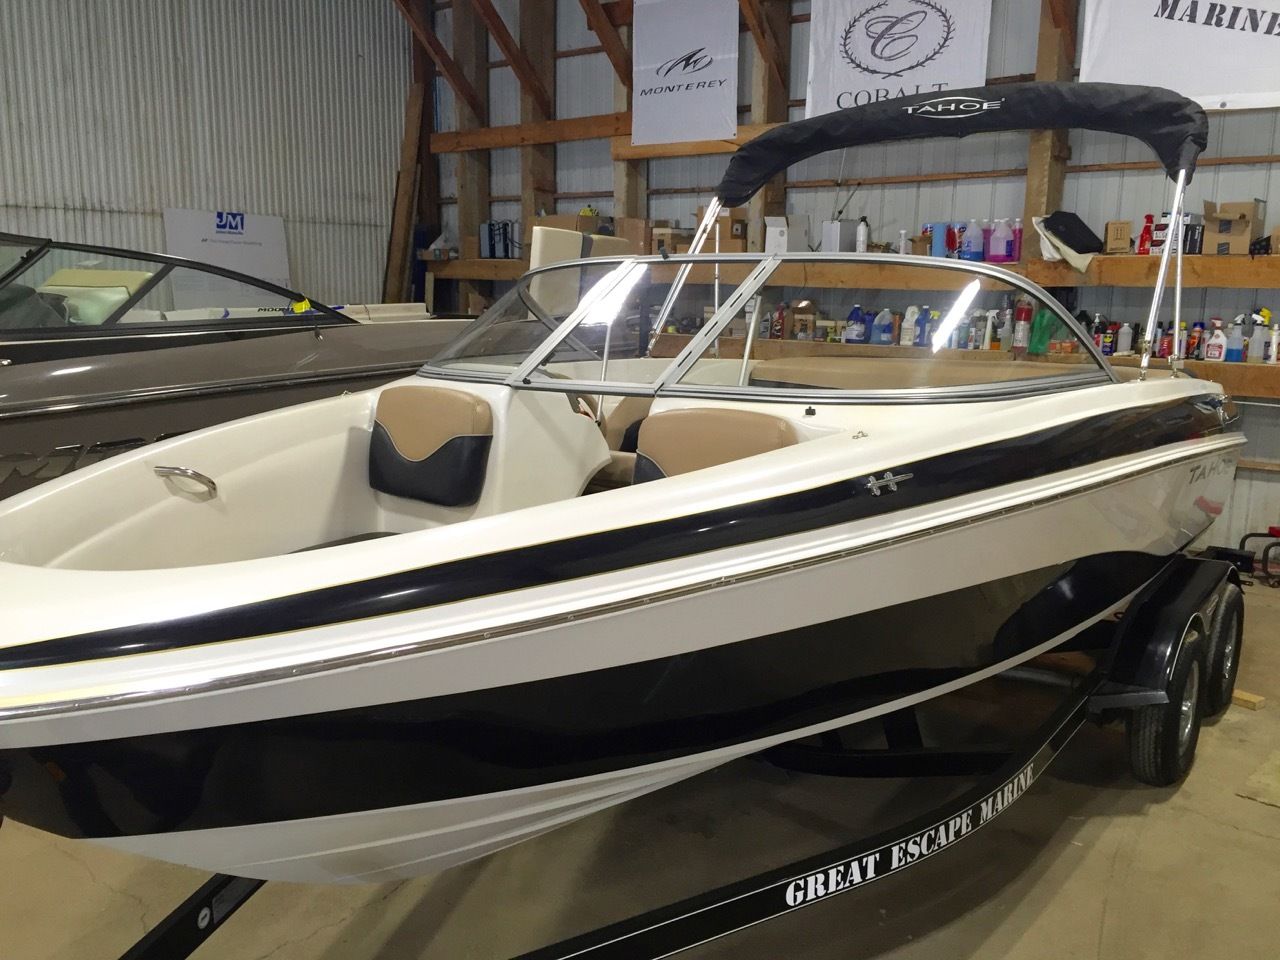 Tahoe Q6 Sport Bowrider 2006 for sale for $14,950 